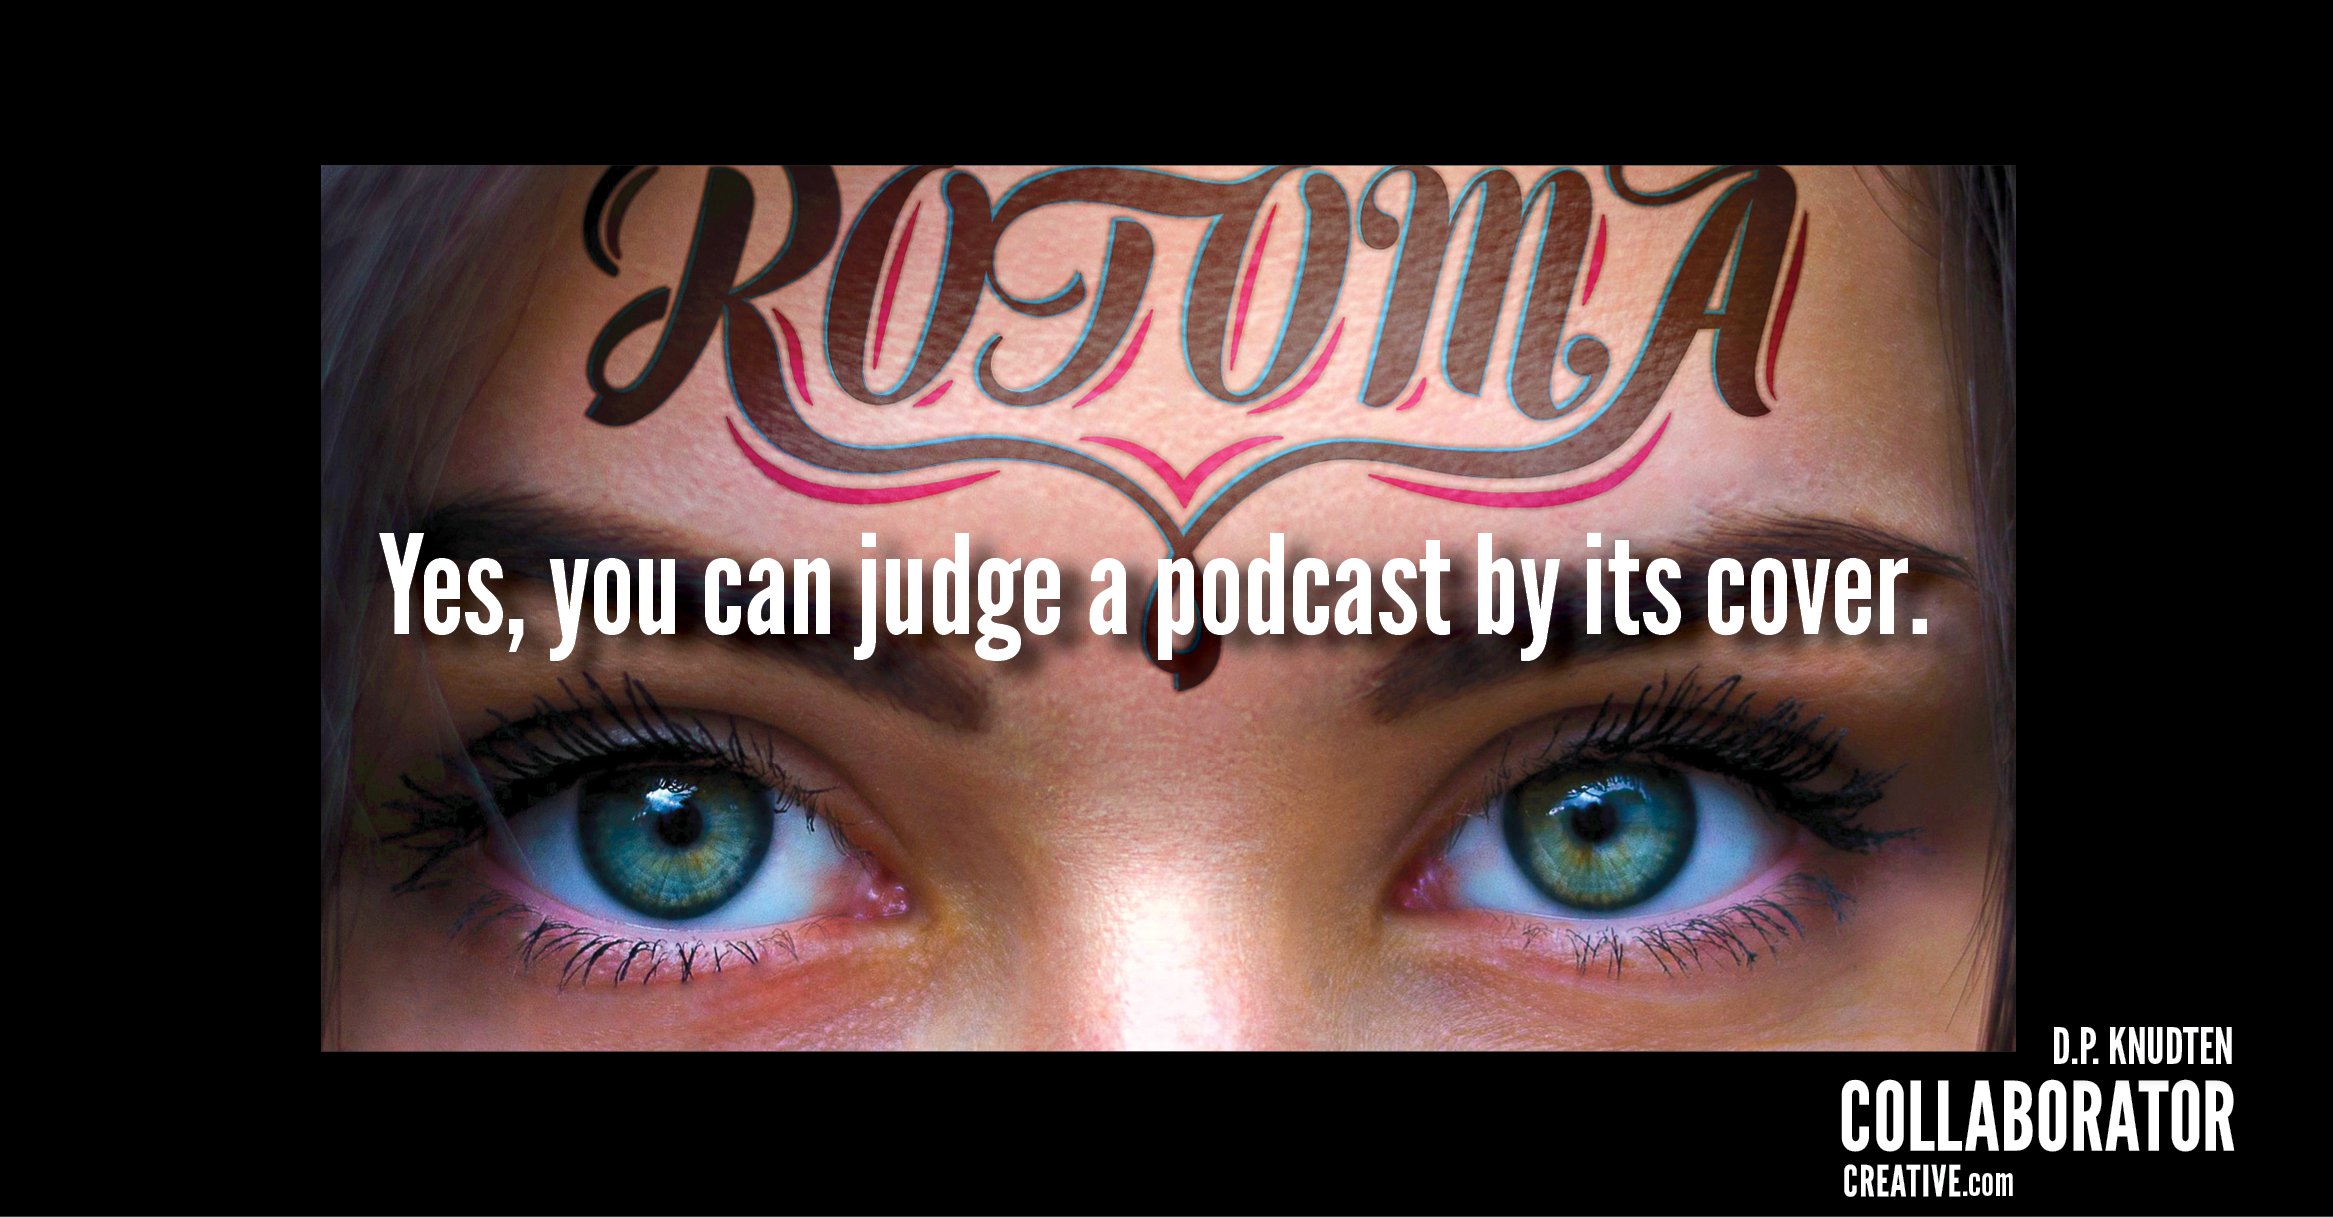 Yes, You Can Judge A Podcast by its Cover, a blog post by D.P. Knudten, COLLABORATOR creative